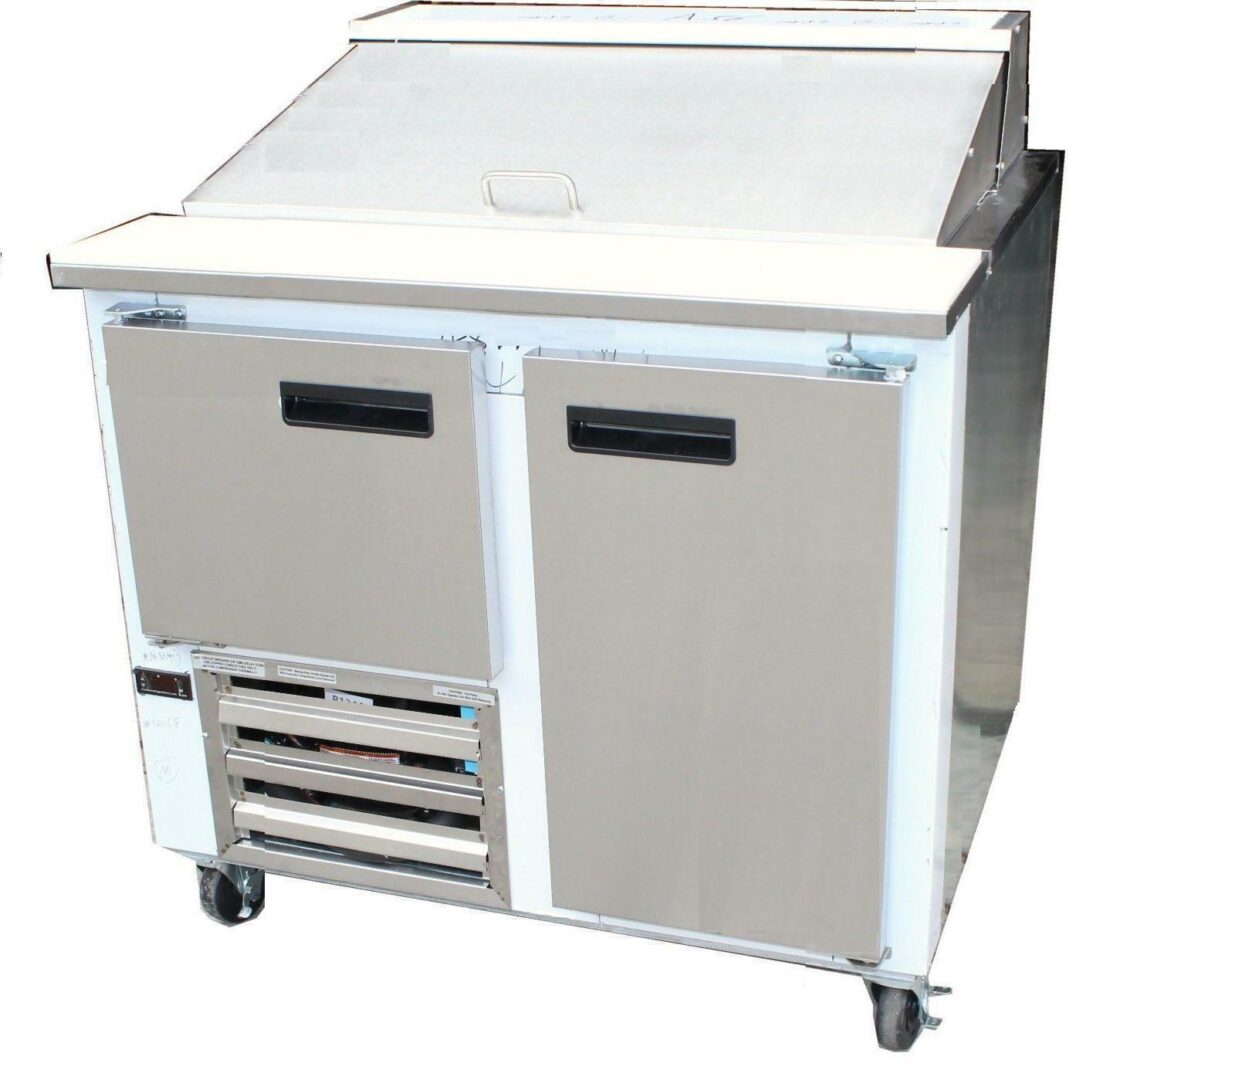 A stainless steel refrigerator with two doors and four drawers.